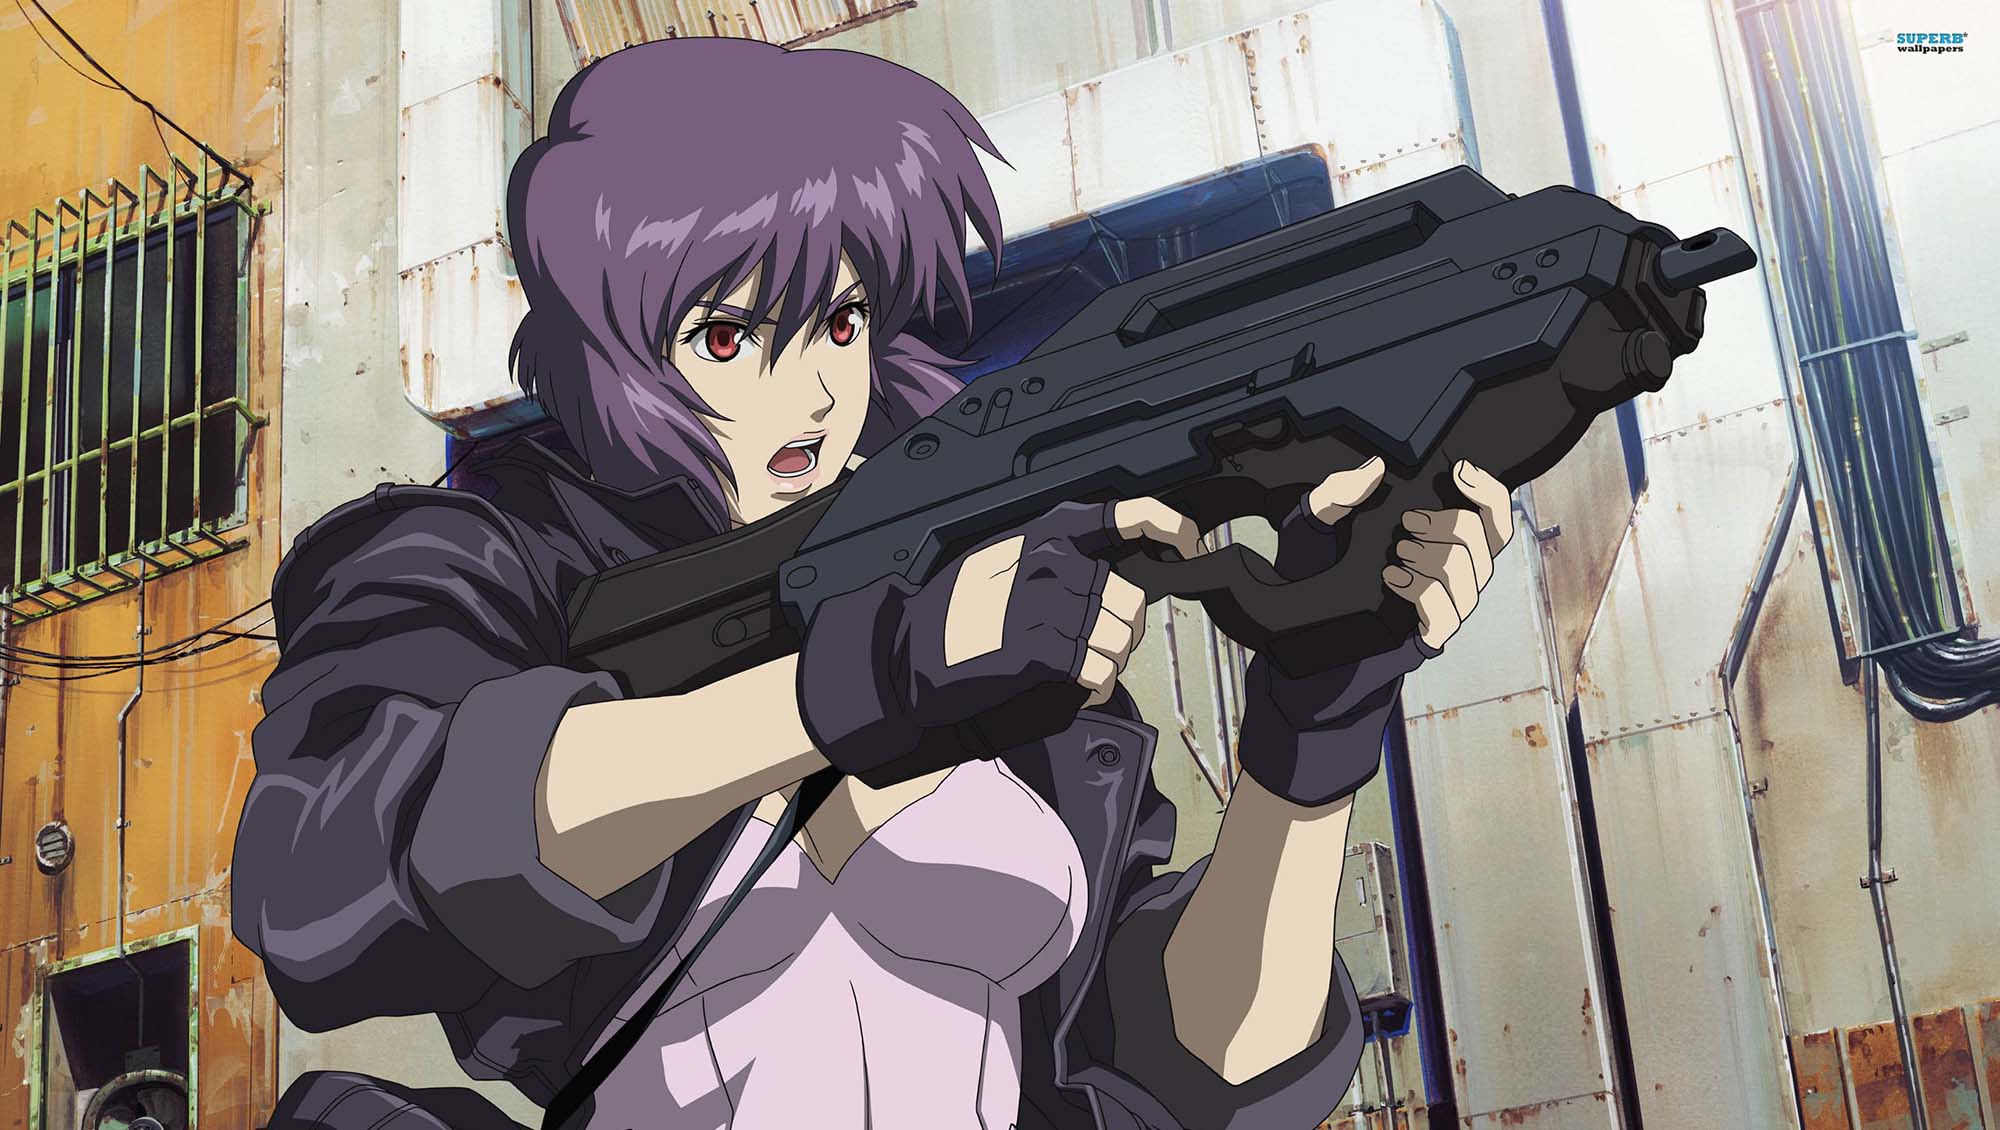 7. "Motoko Kusanagi" from the anime series "Ghost in the Shell" - wide 3